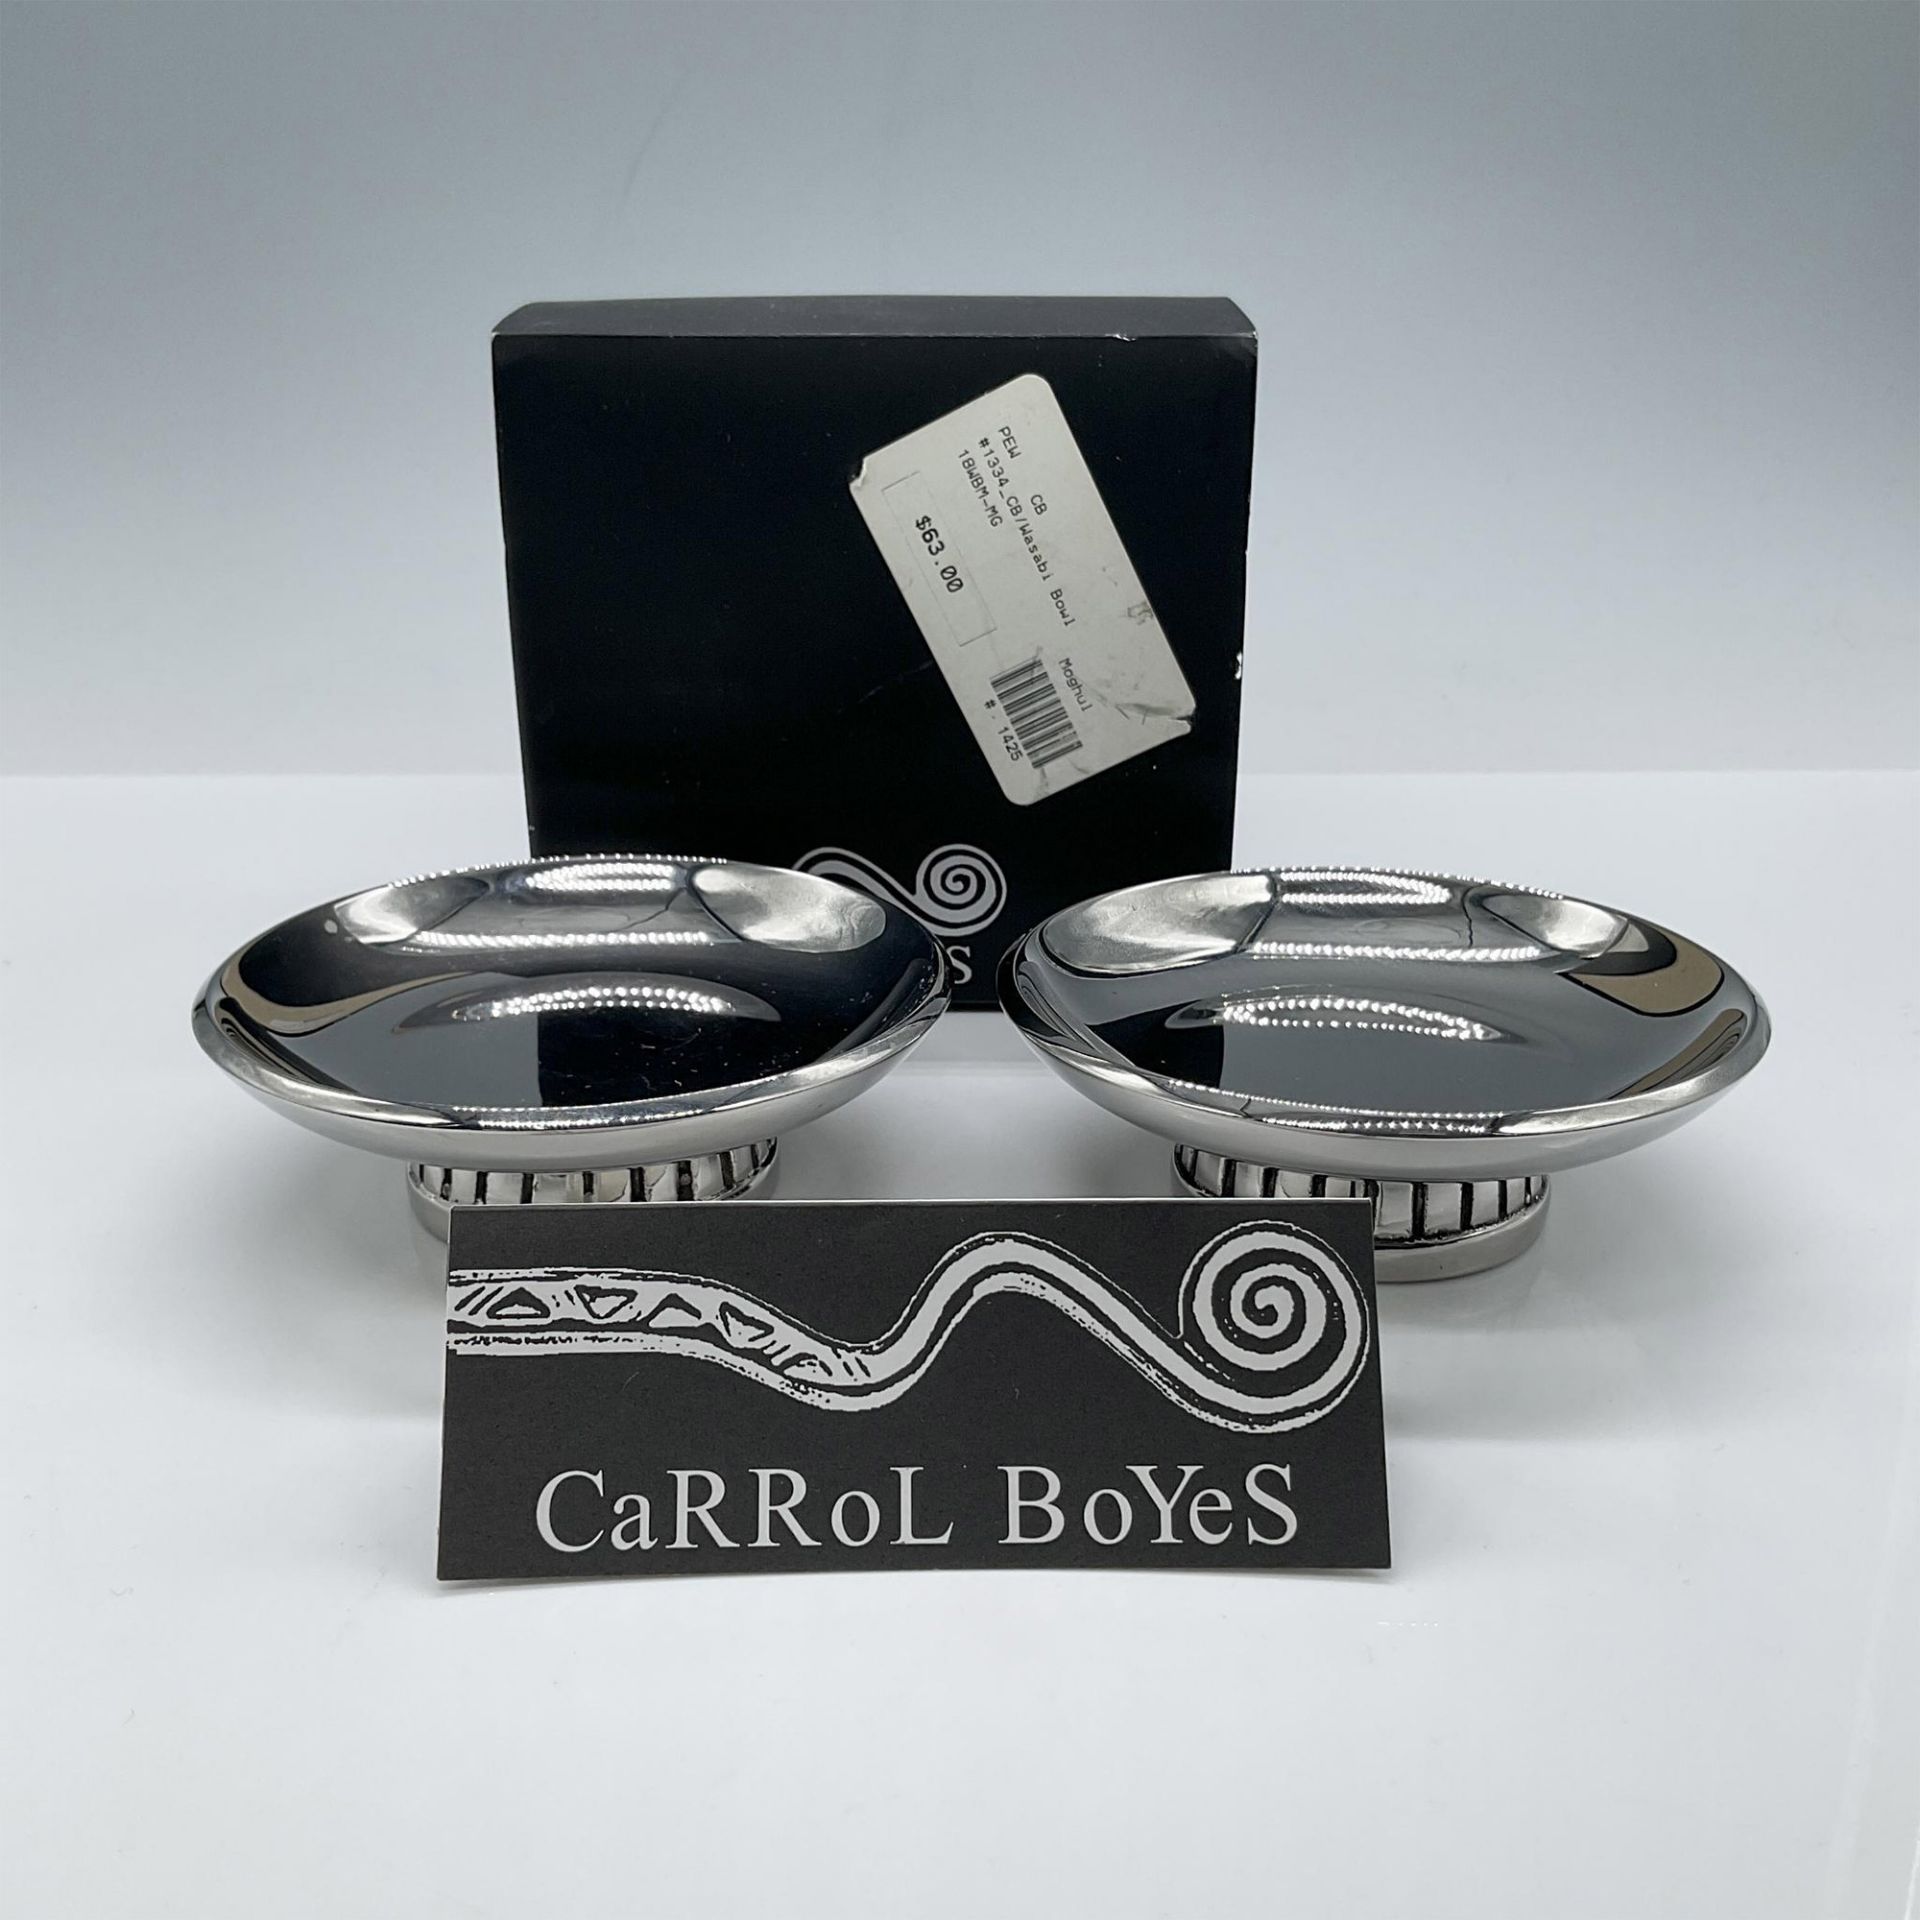 Pair of Carrol Boyes Stainless Steel Wasabi Bowls 18/8 - Image 5 of 5